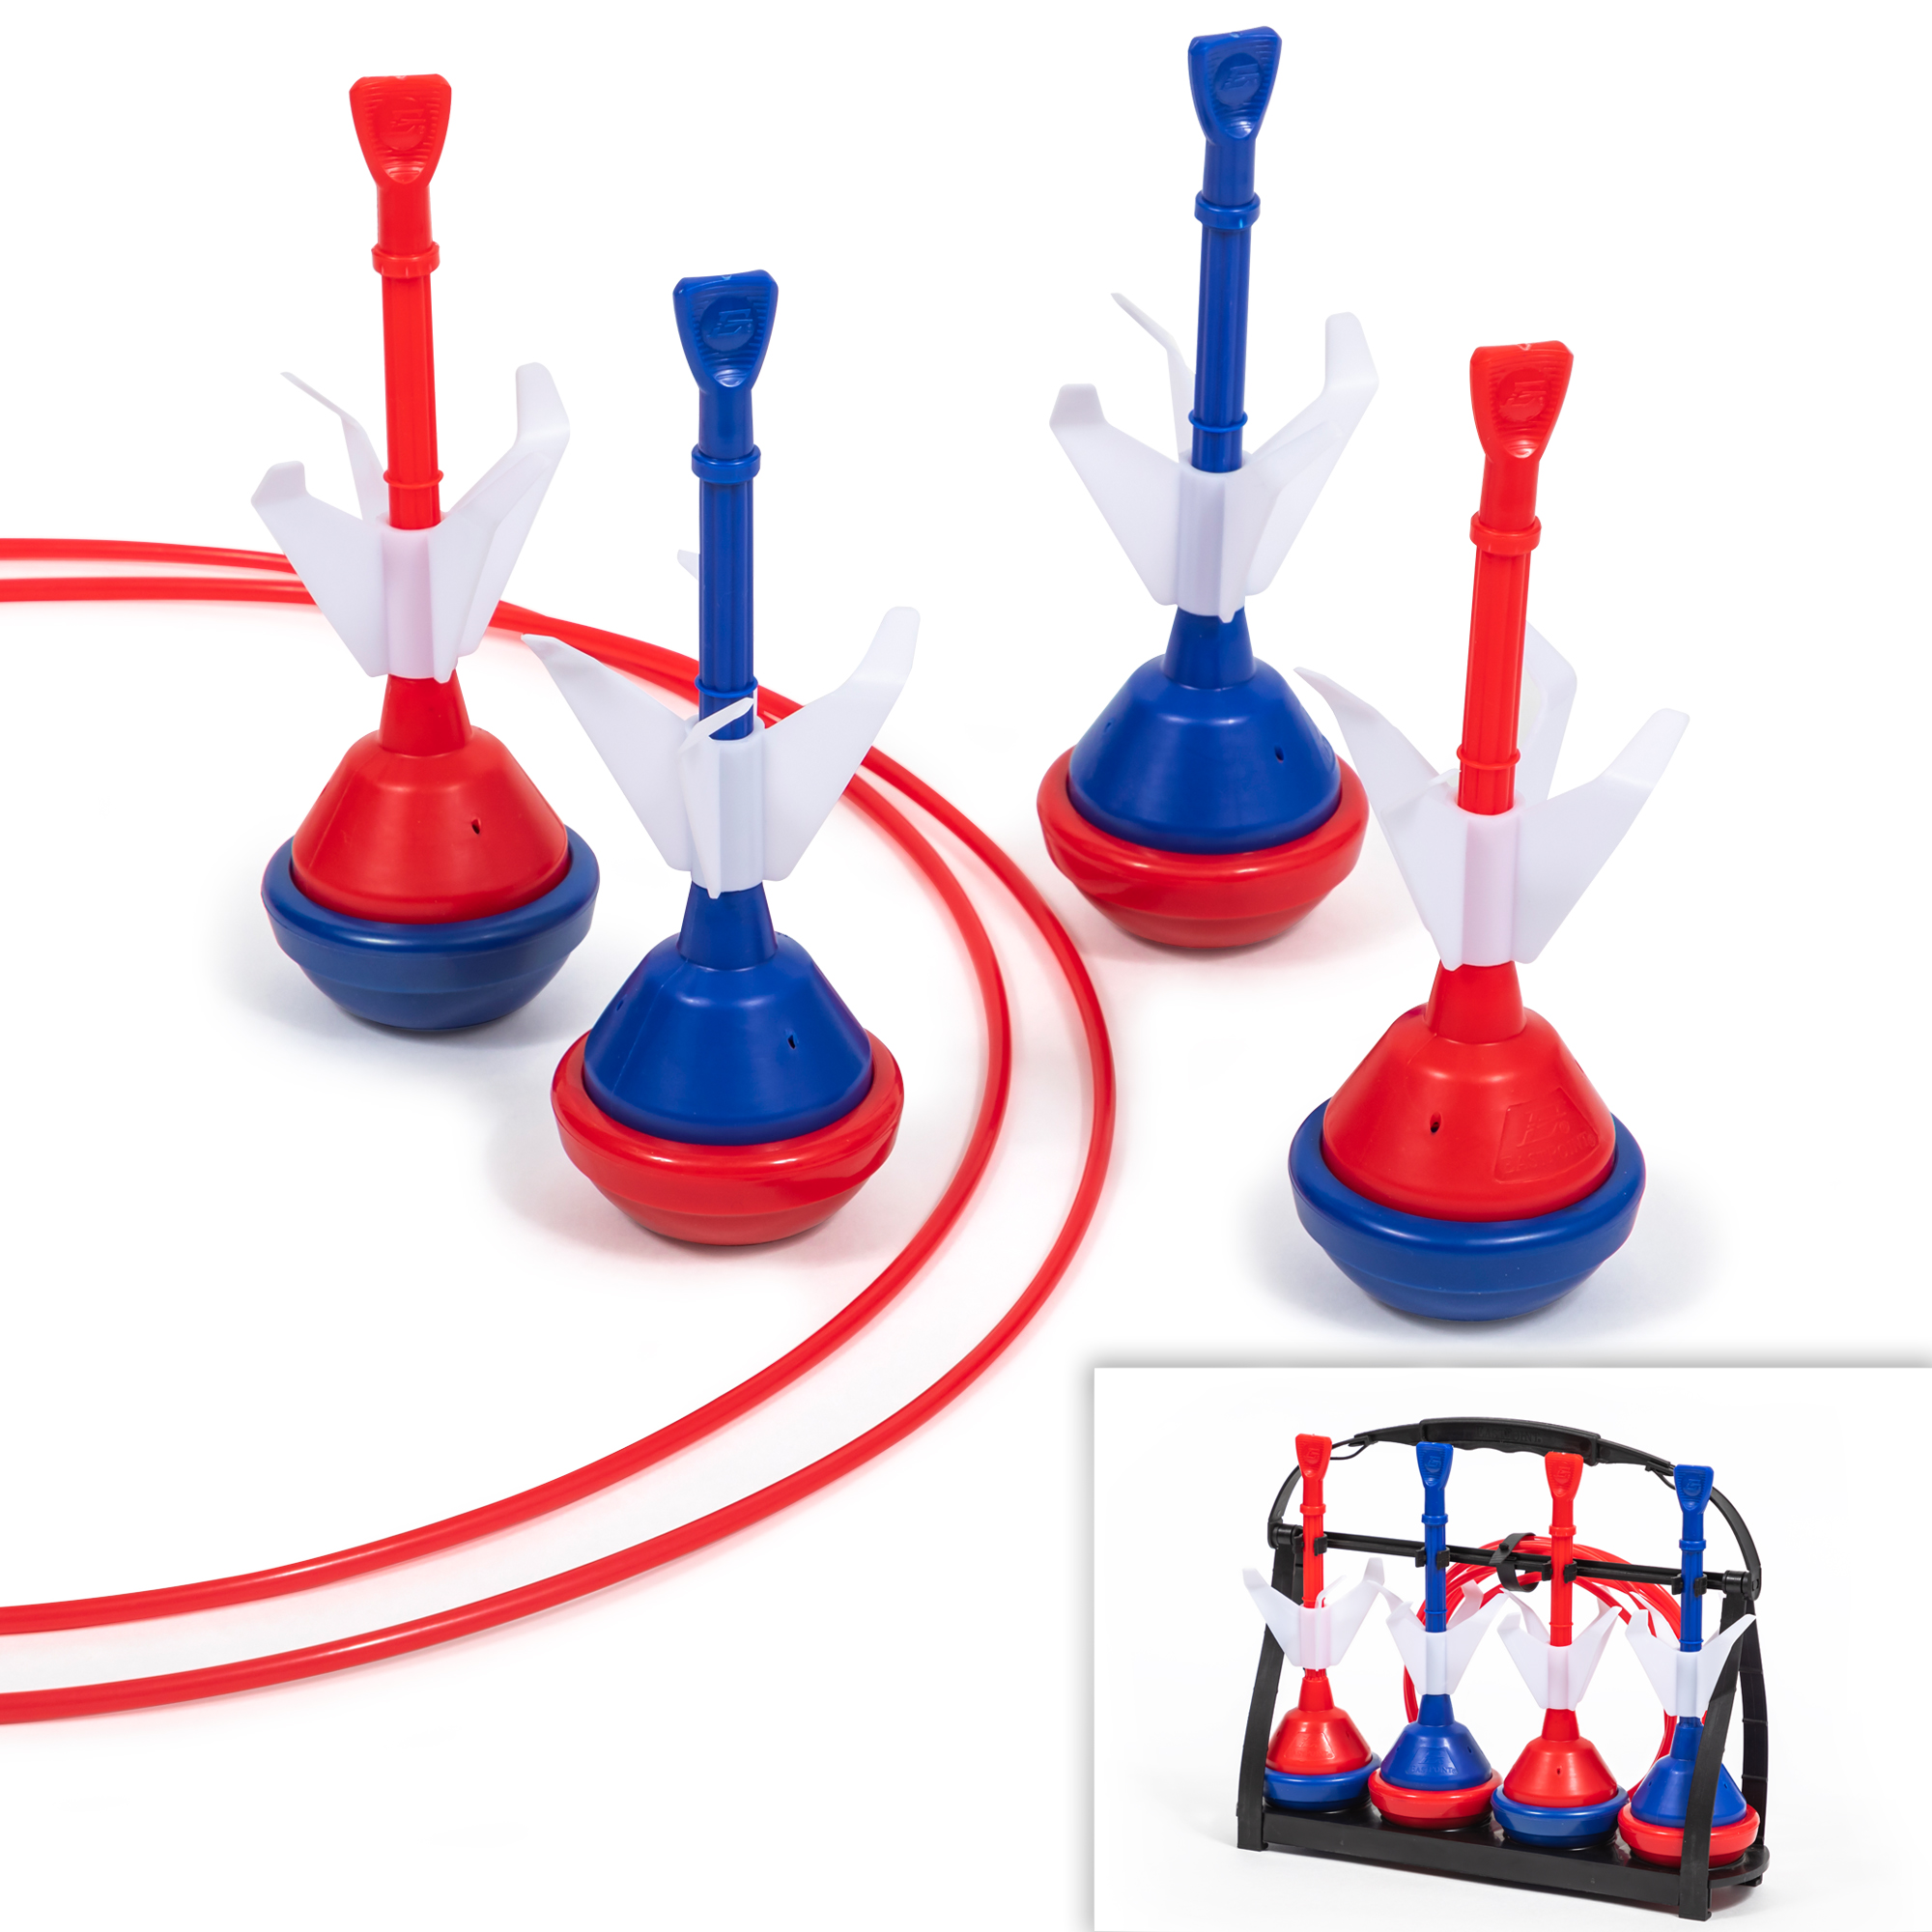 EastPoint Sports Americana Lawn Darts Classic Family Game - image 1 of 9